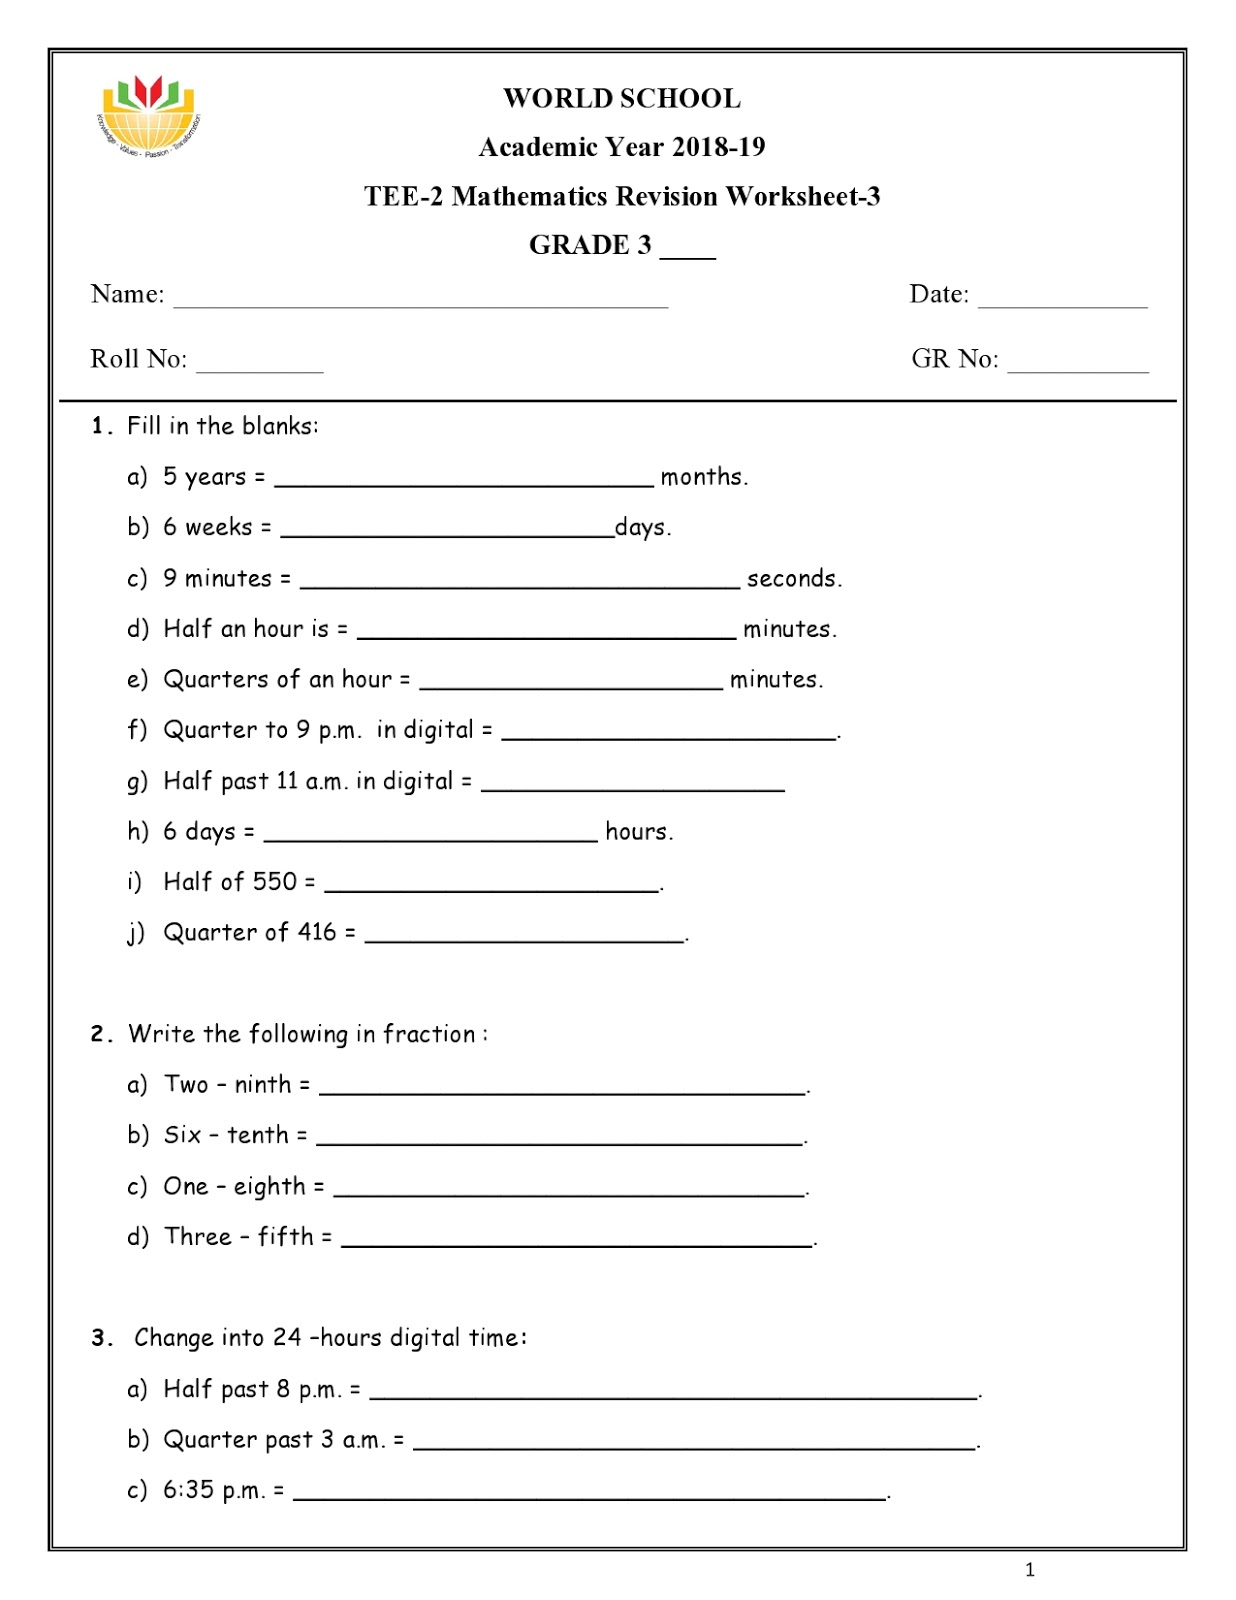 revision-worksheets-for-grade-3-as-on-09-05-2019-world-school-oman